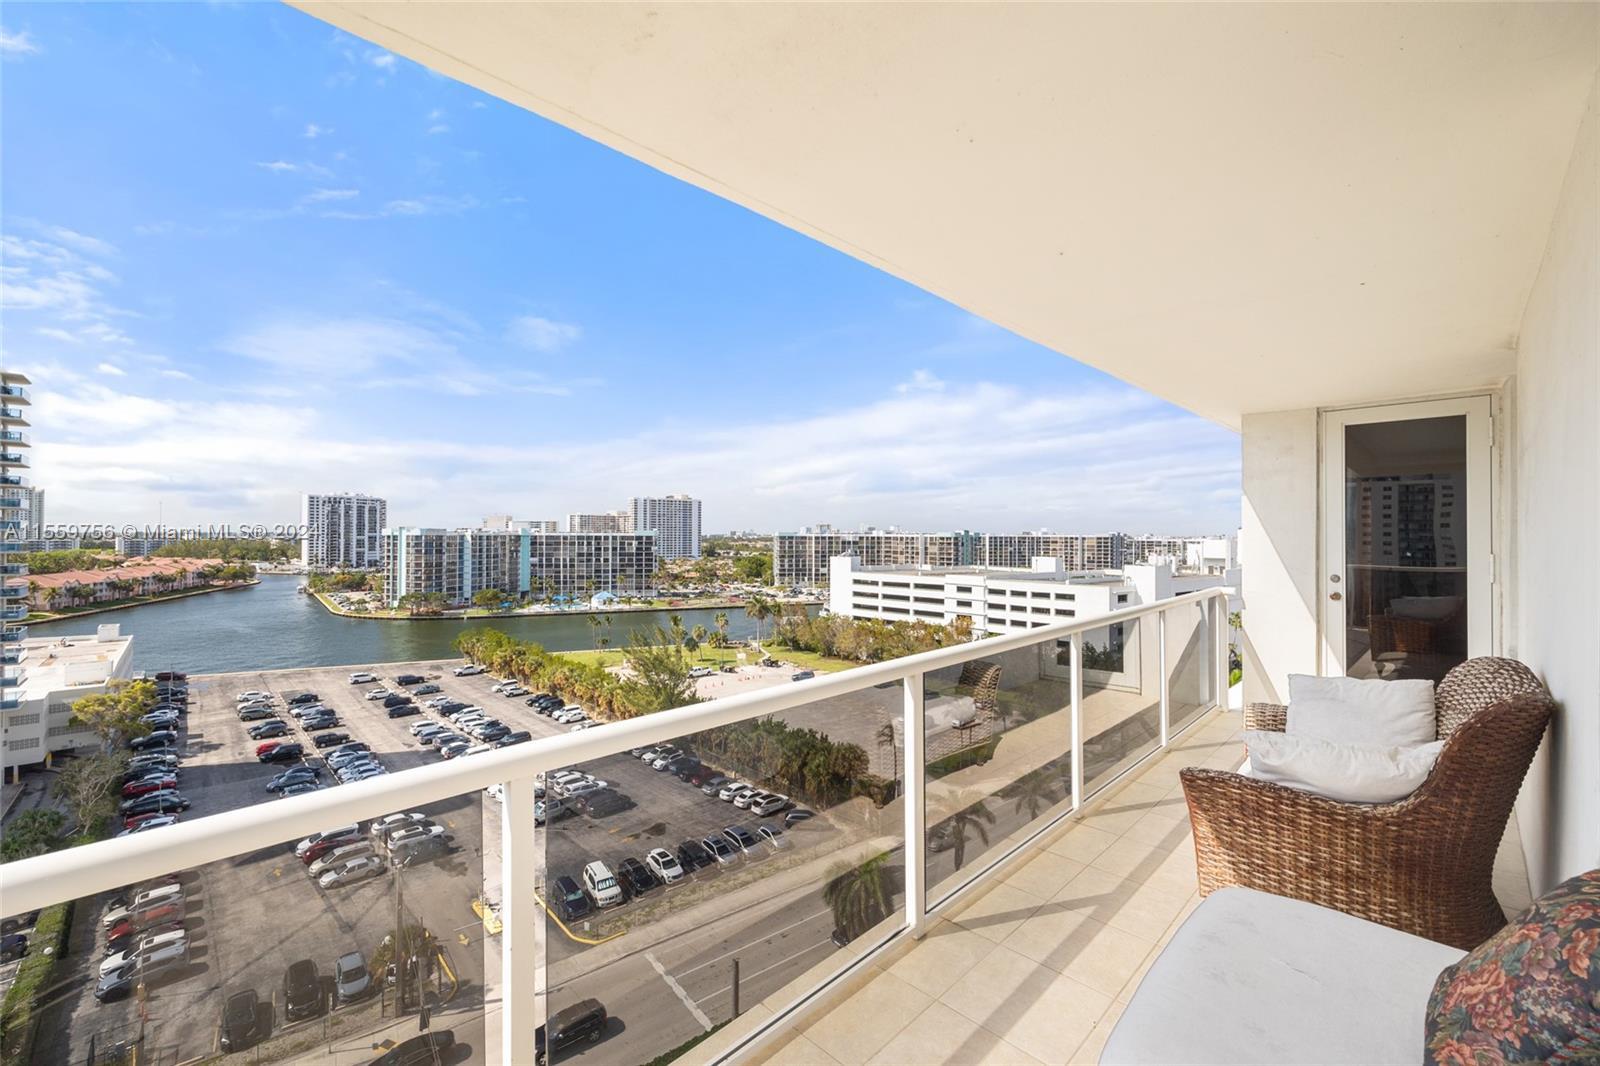 Photo of 3725 S Ocean Dr #1124 in Hollywood, FL